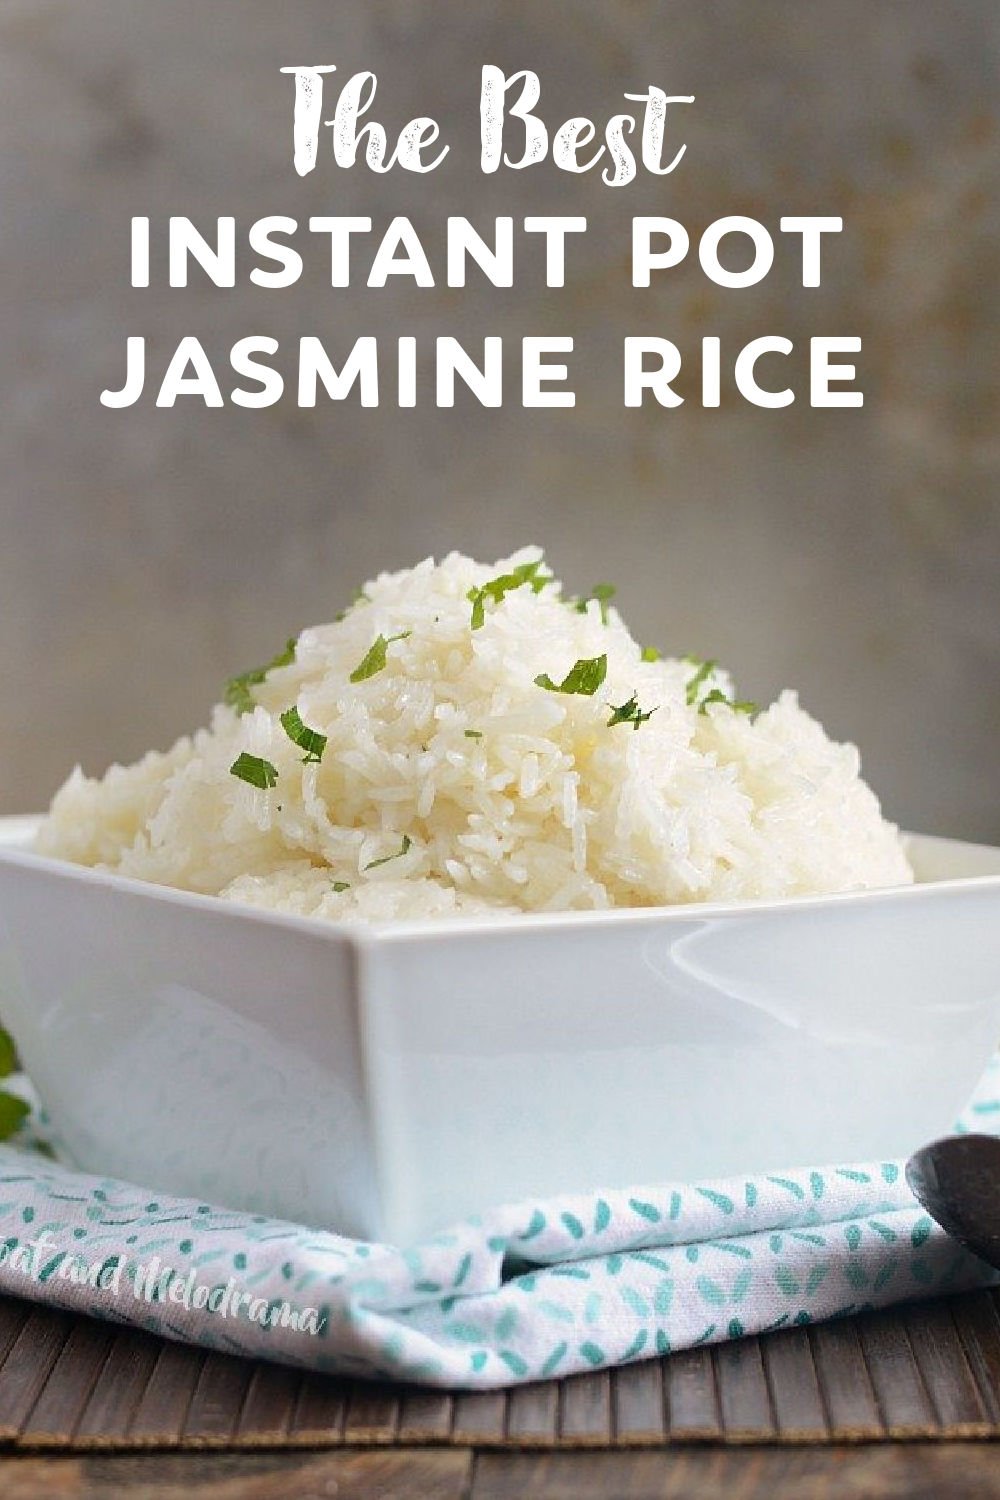 This easy Instant Pot Jasmine Rice recipe lets you make perfect jasmine rice in the electric pressure cooker in just a few minutes. Serve it as a quick side dish or as part of your main dish! via @meamel